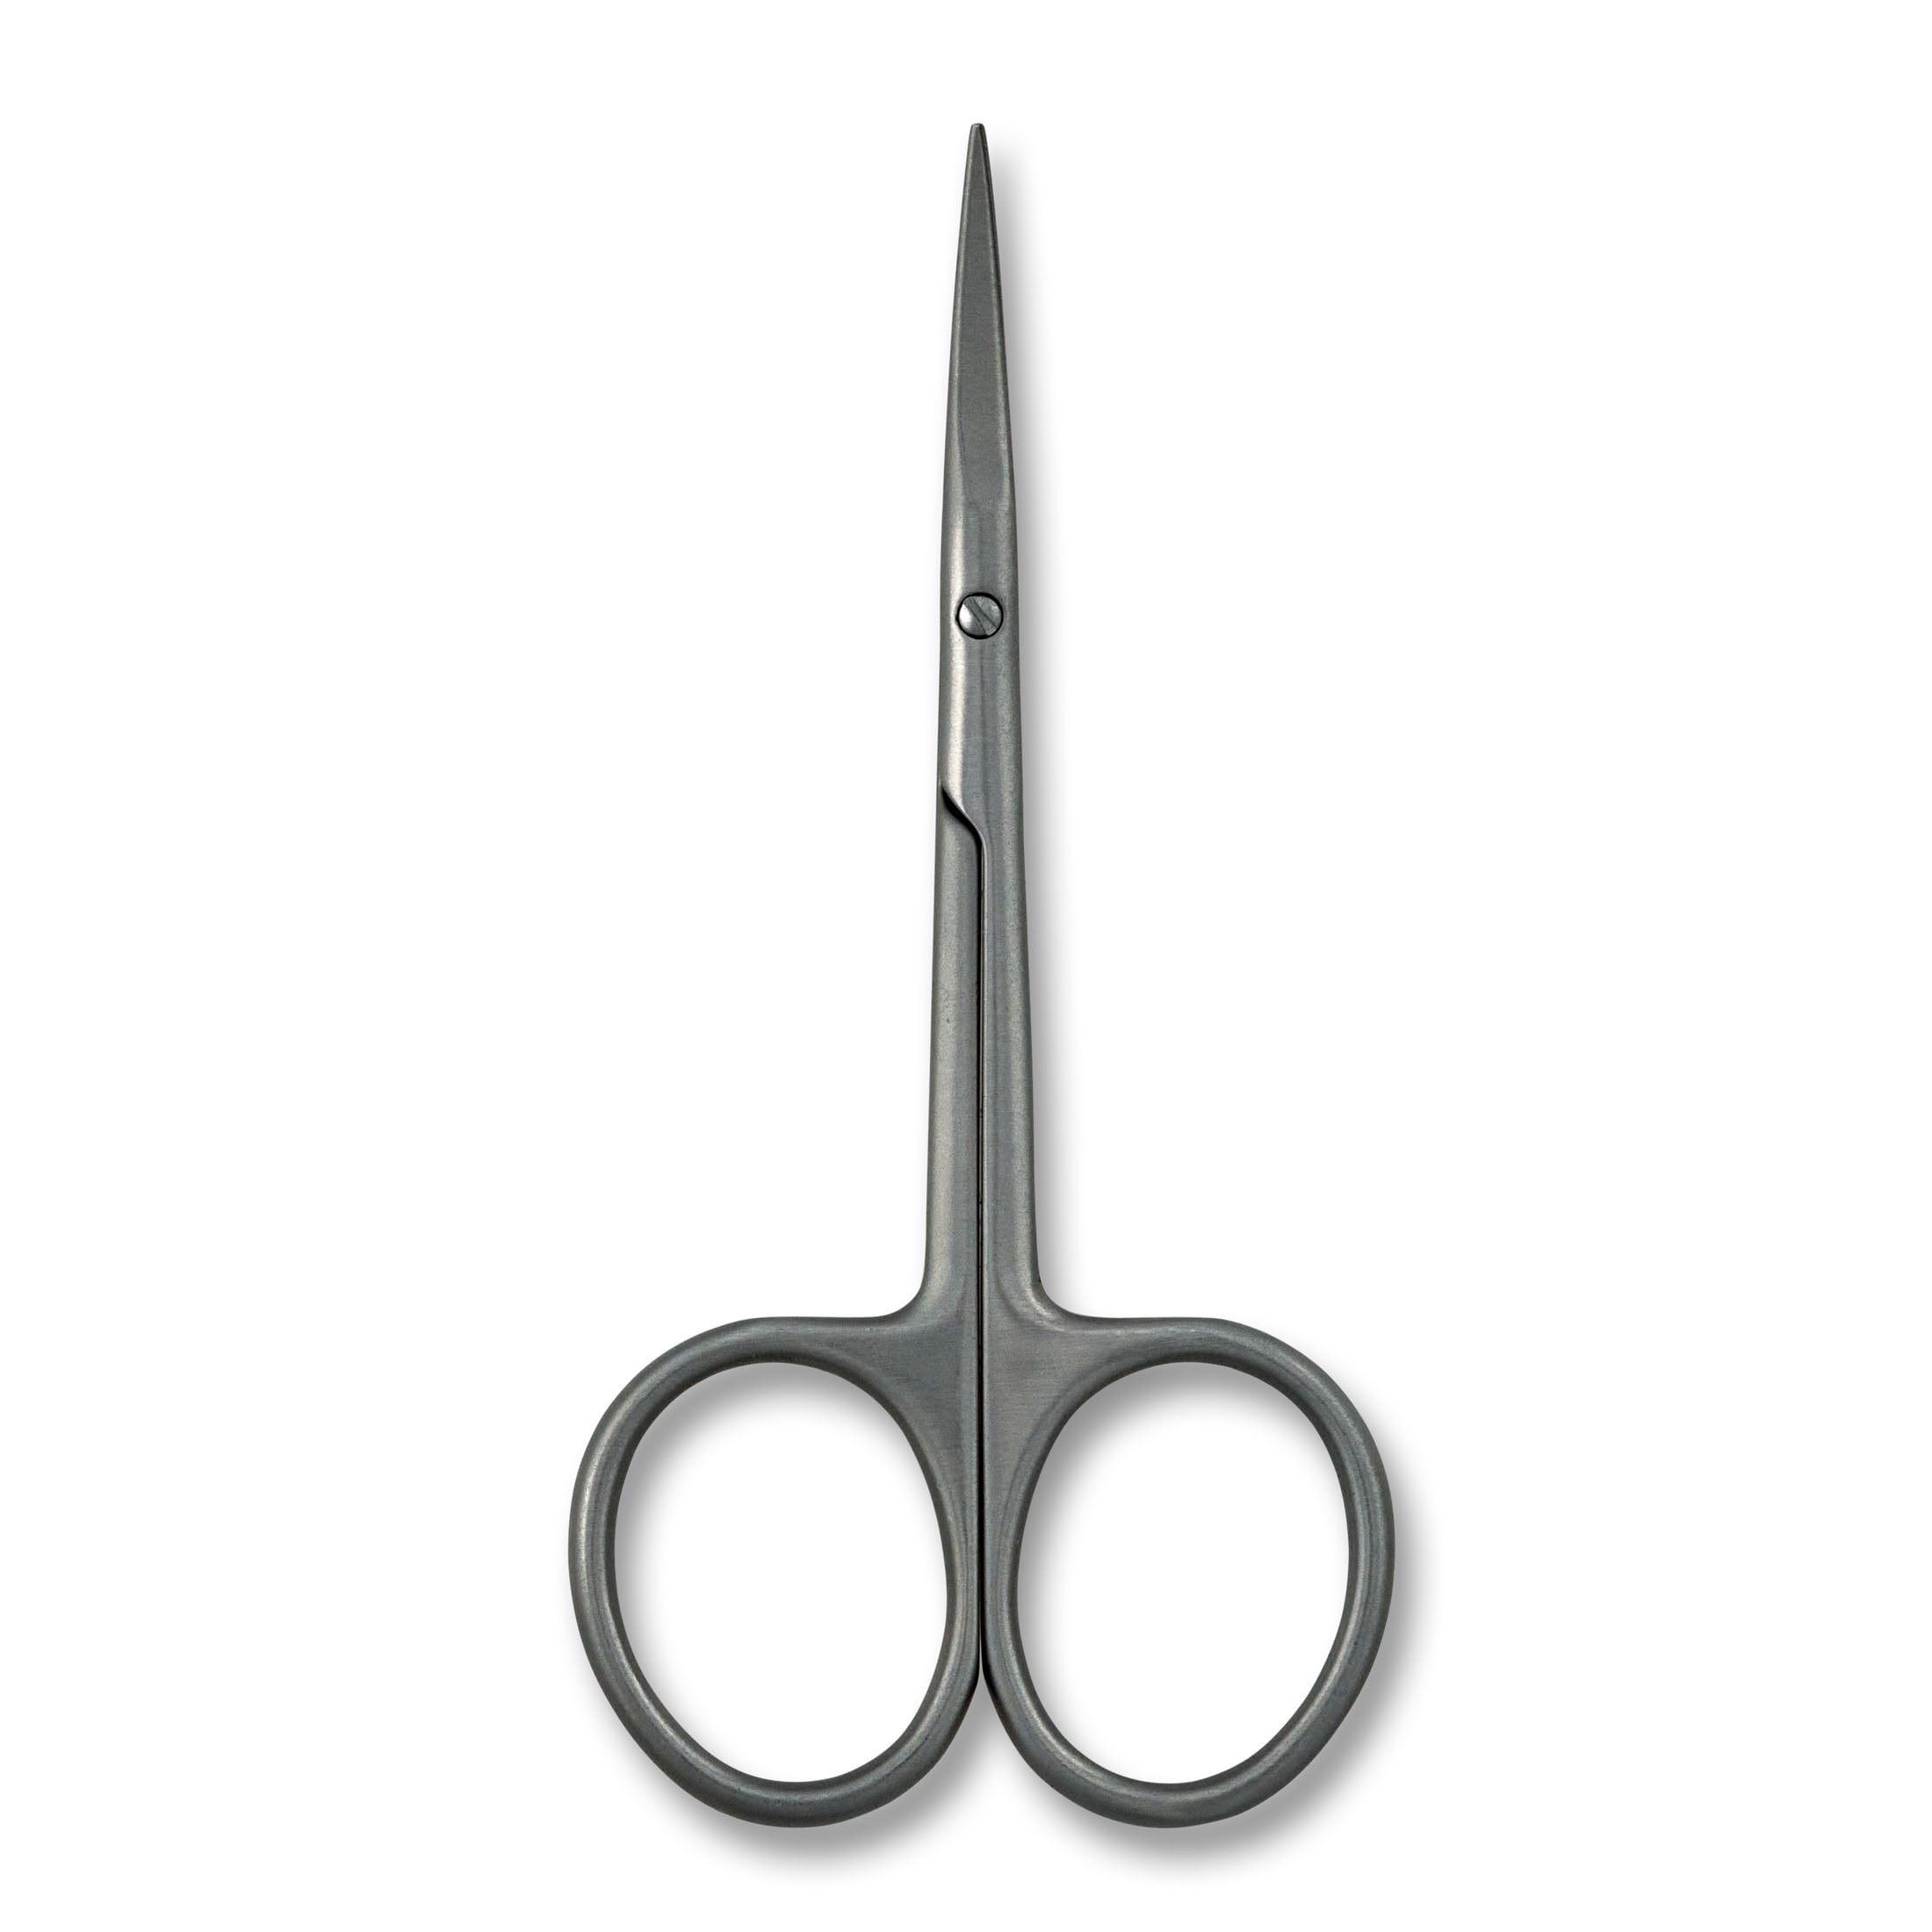 Japonesque Stainless Steel Silver Beauty Scissors